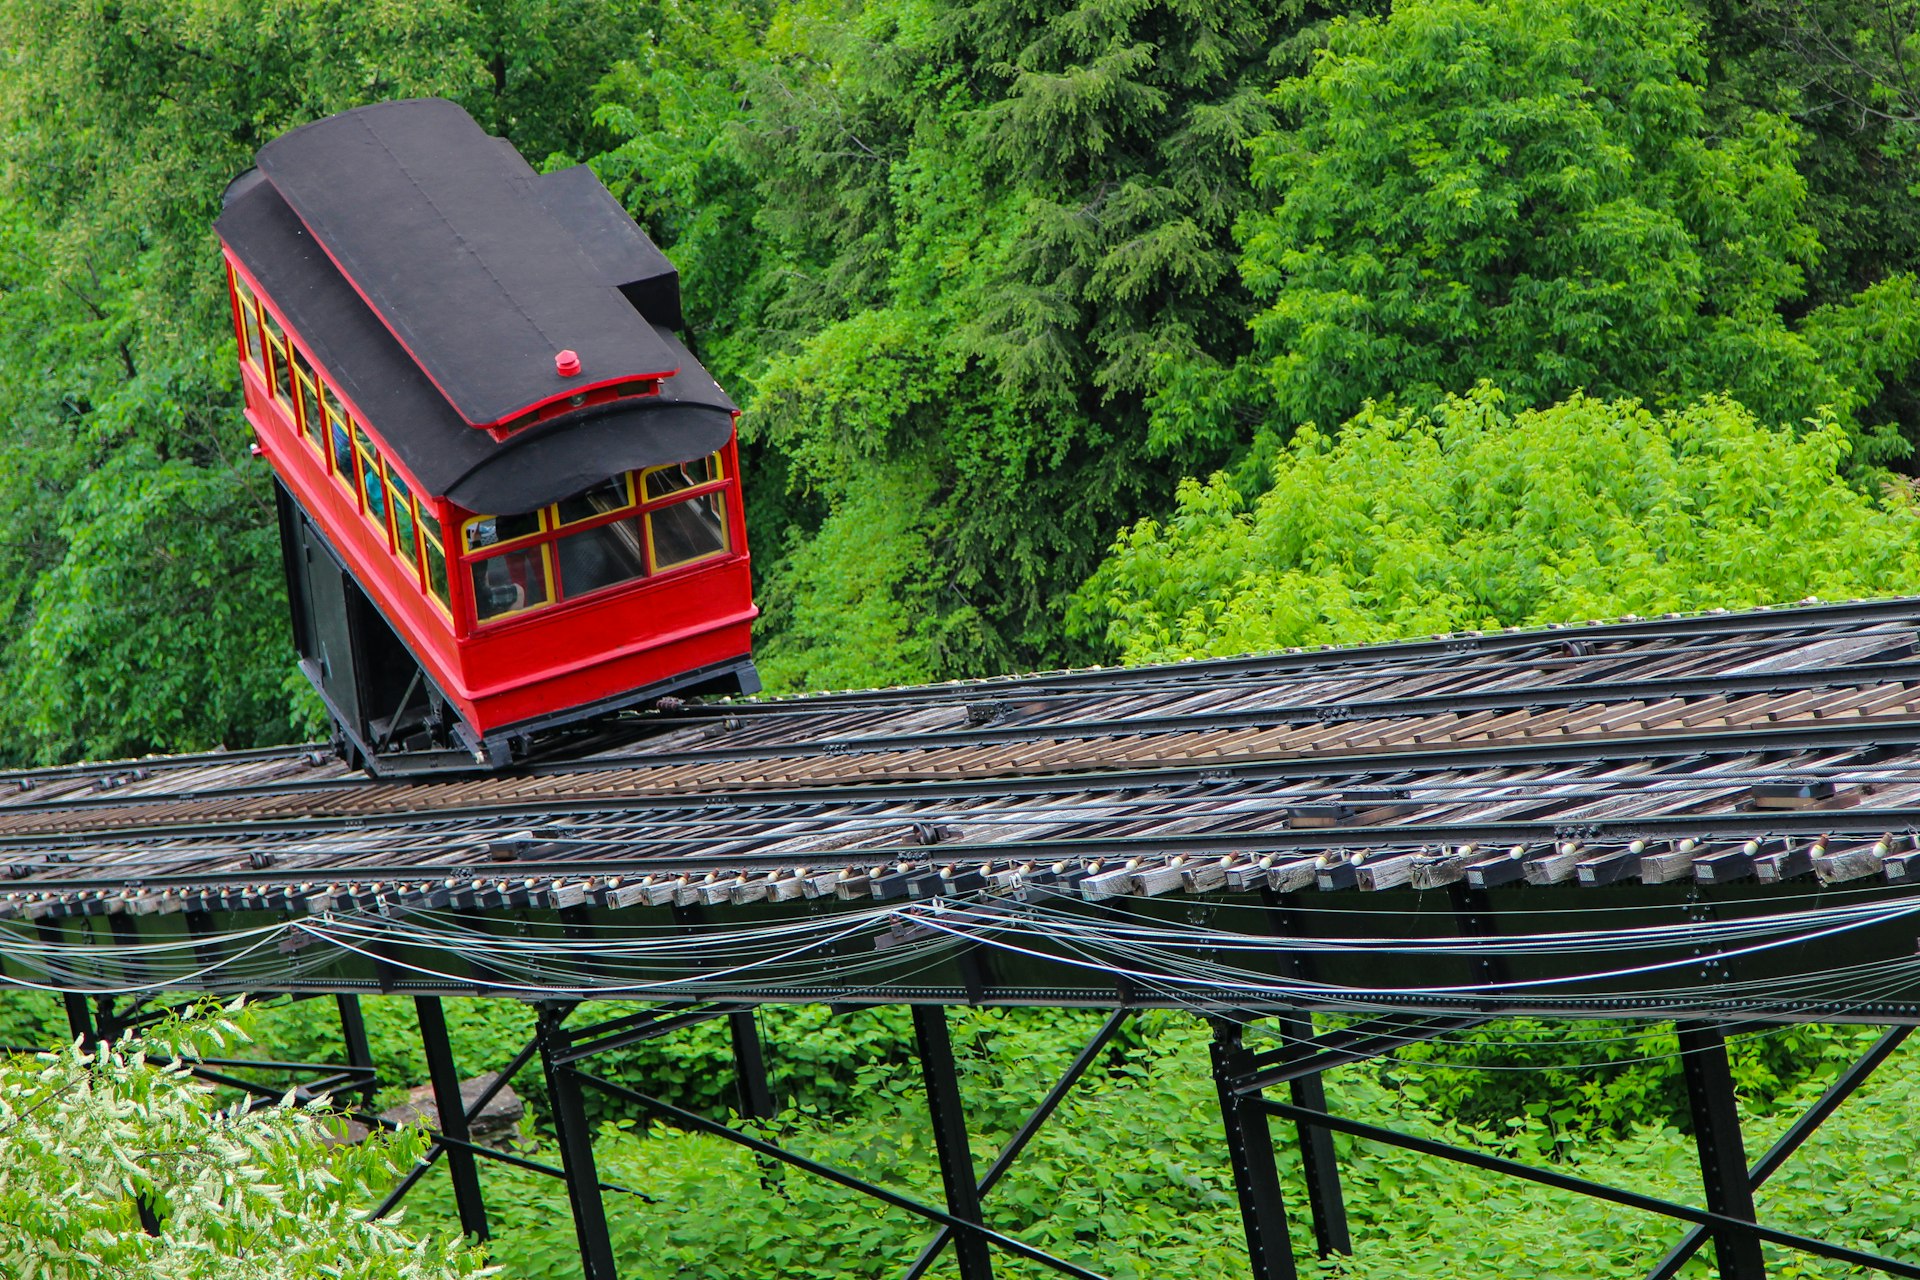 Looking down on the inclined tracks of the Duquesne Incline from a viewing platform atop Mount Washington.